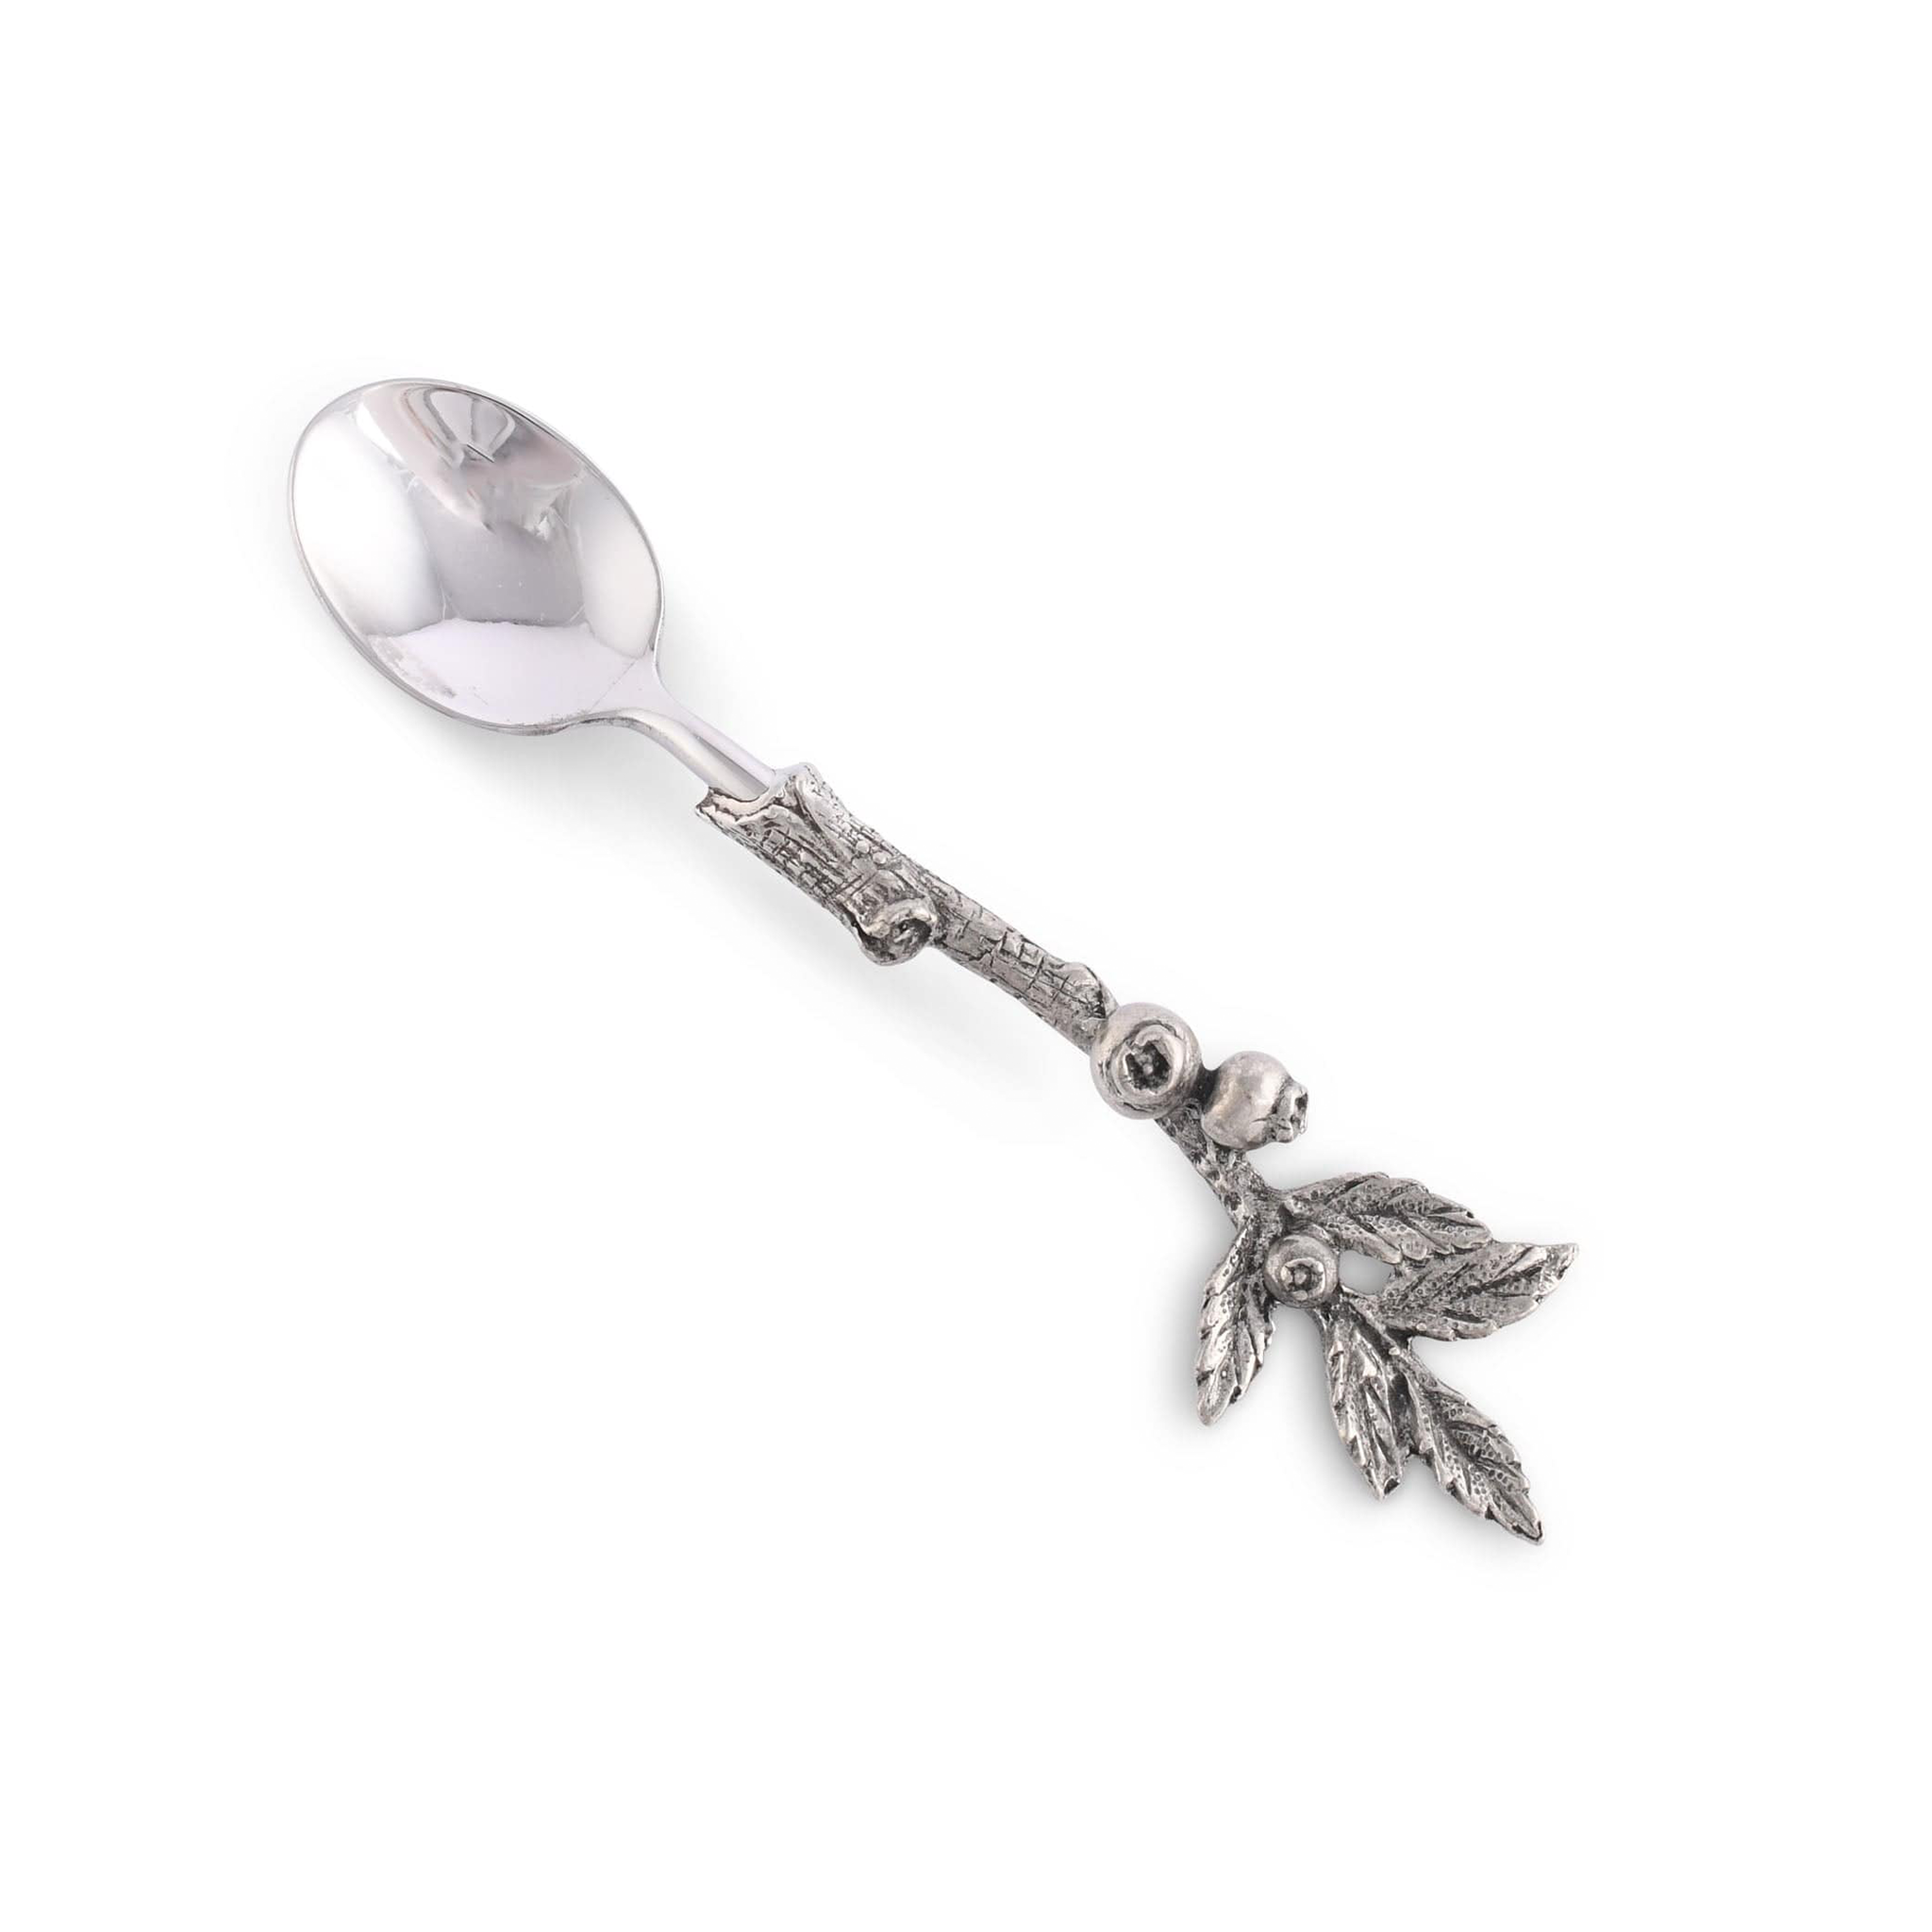 a spoon with a metal handle on a white background